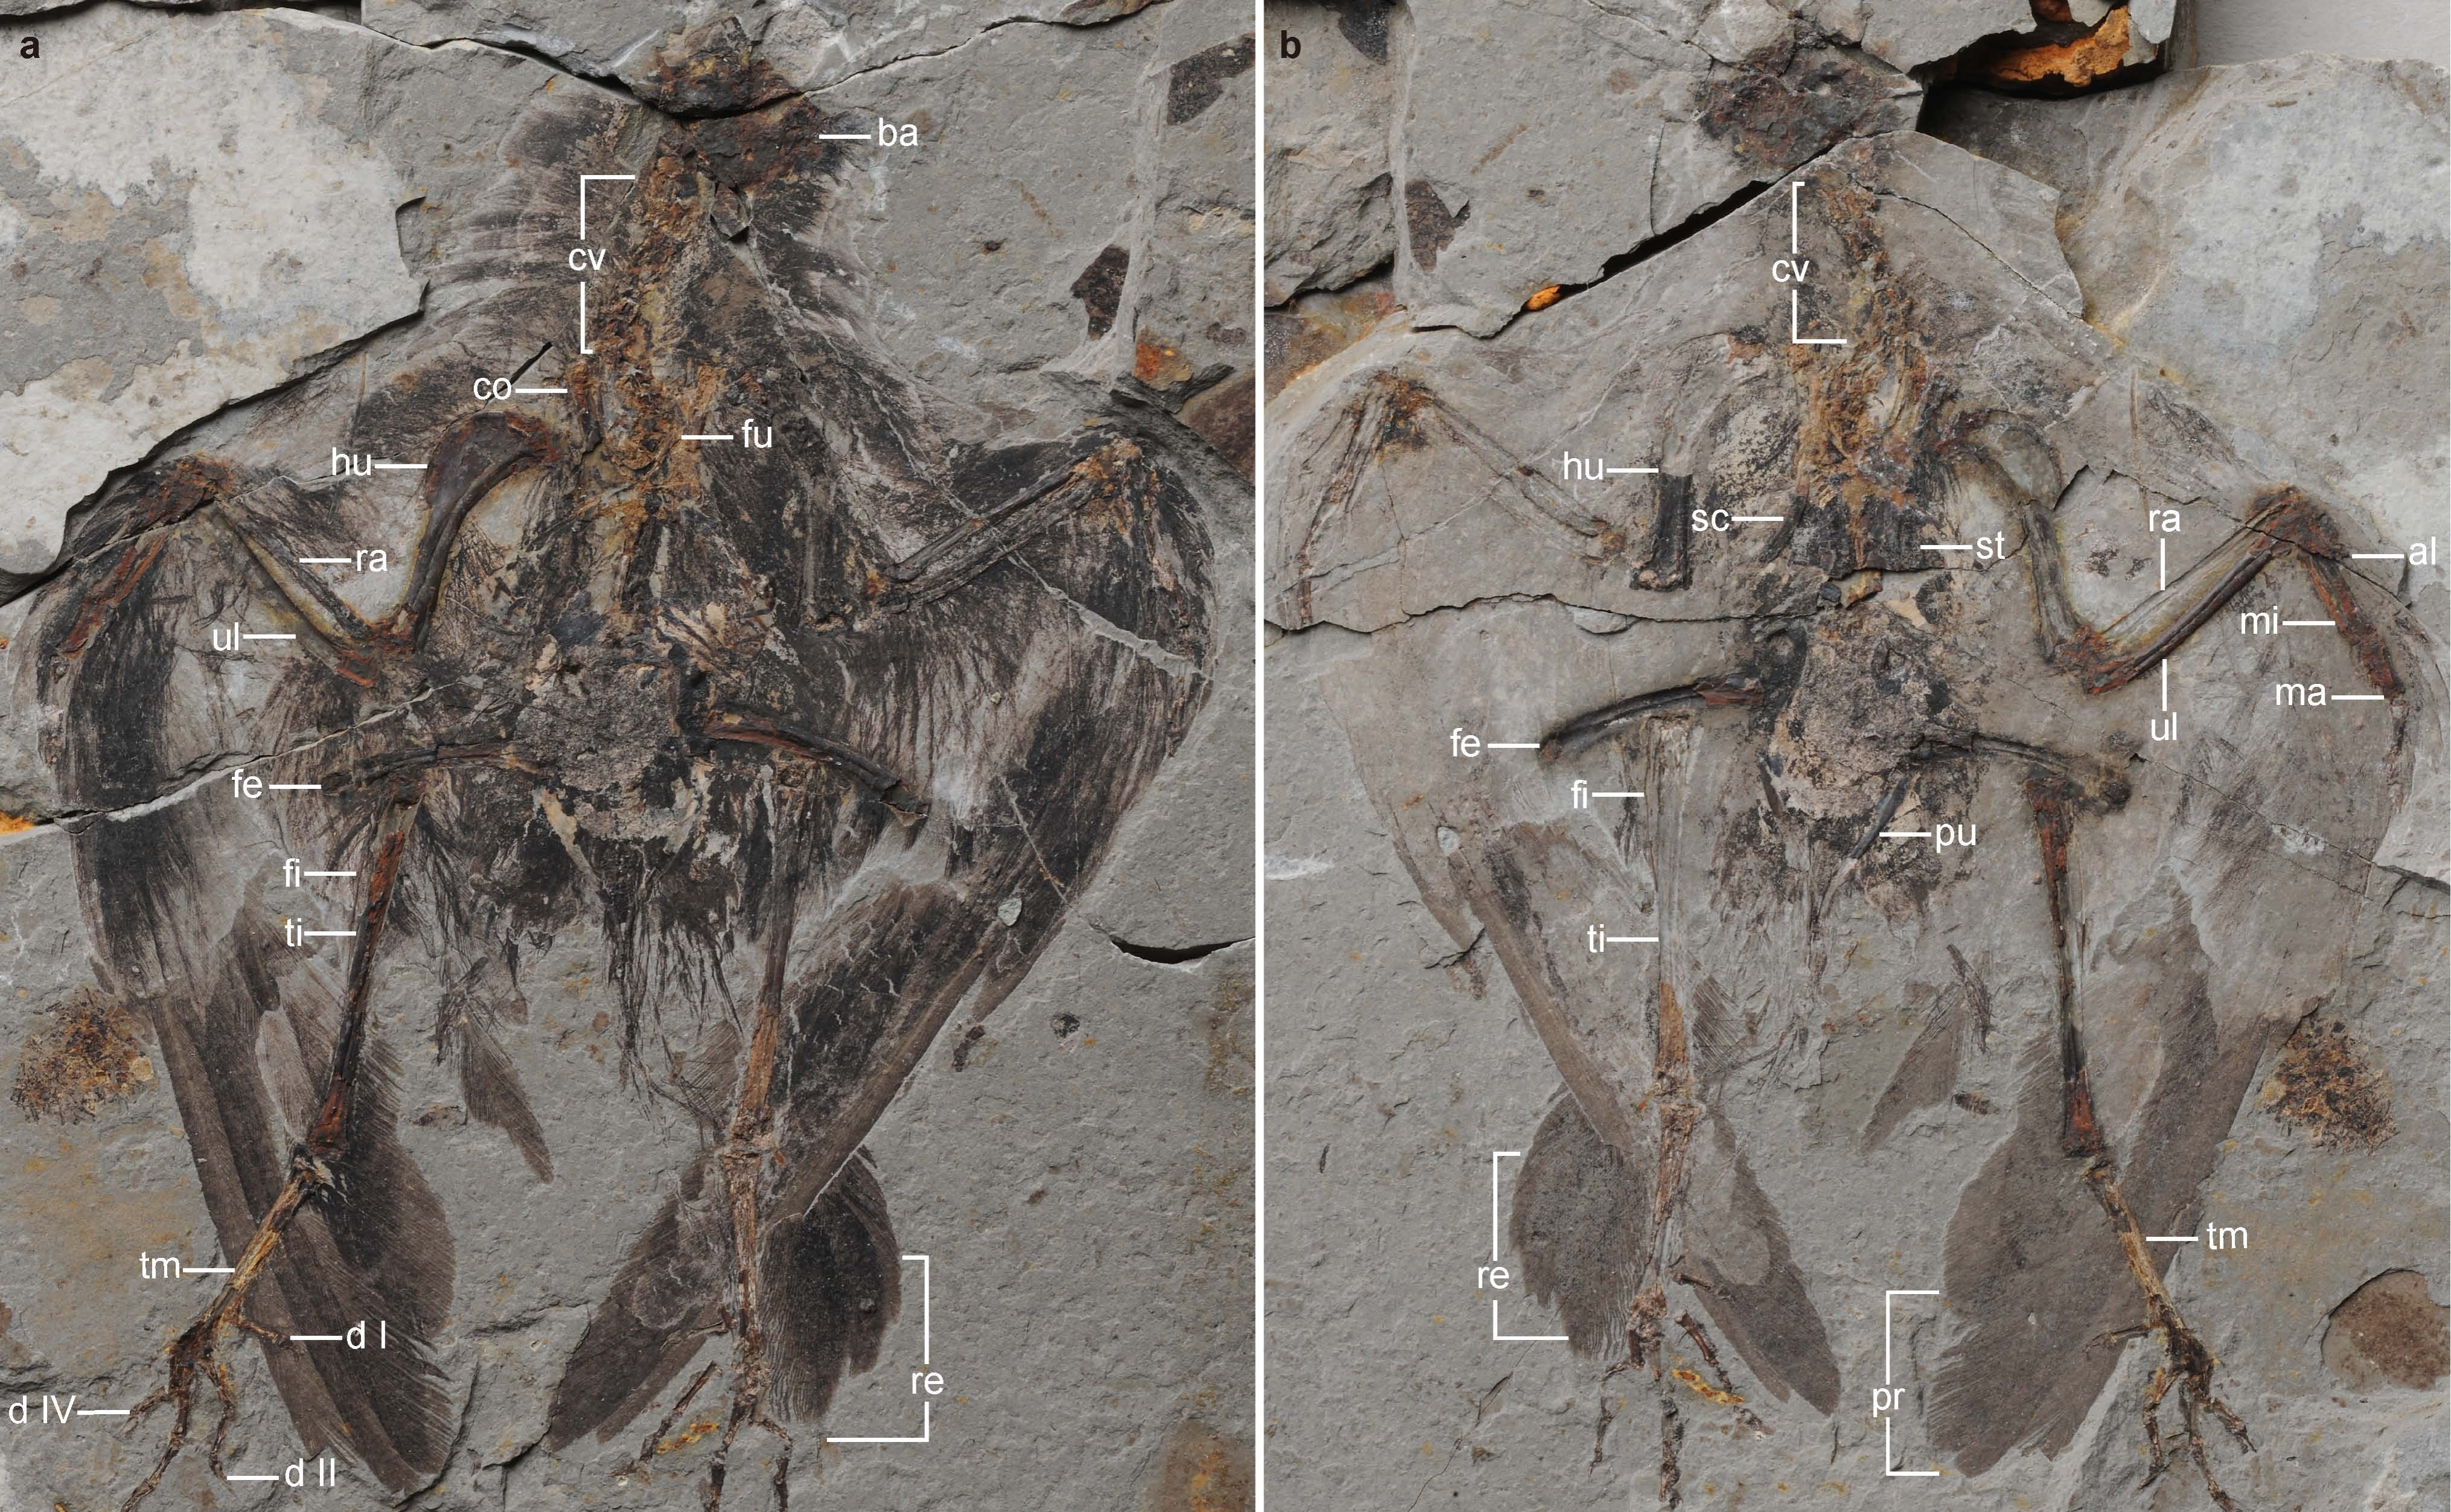 Holotype of Archaeornithura meemannae, the oldest ancestor of modern birds has been dug up in China which evolved almost six million years earlier than previously thought.